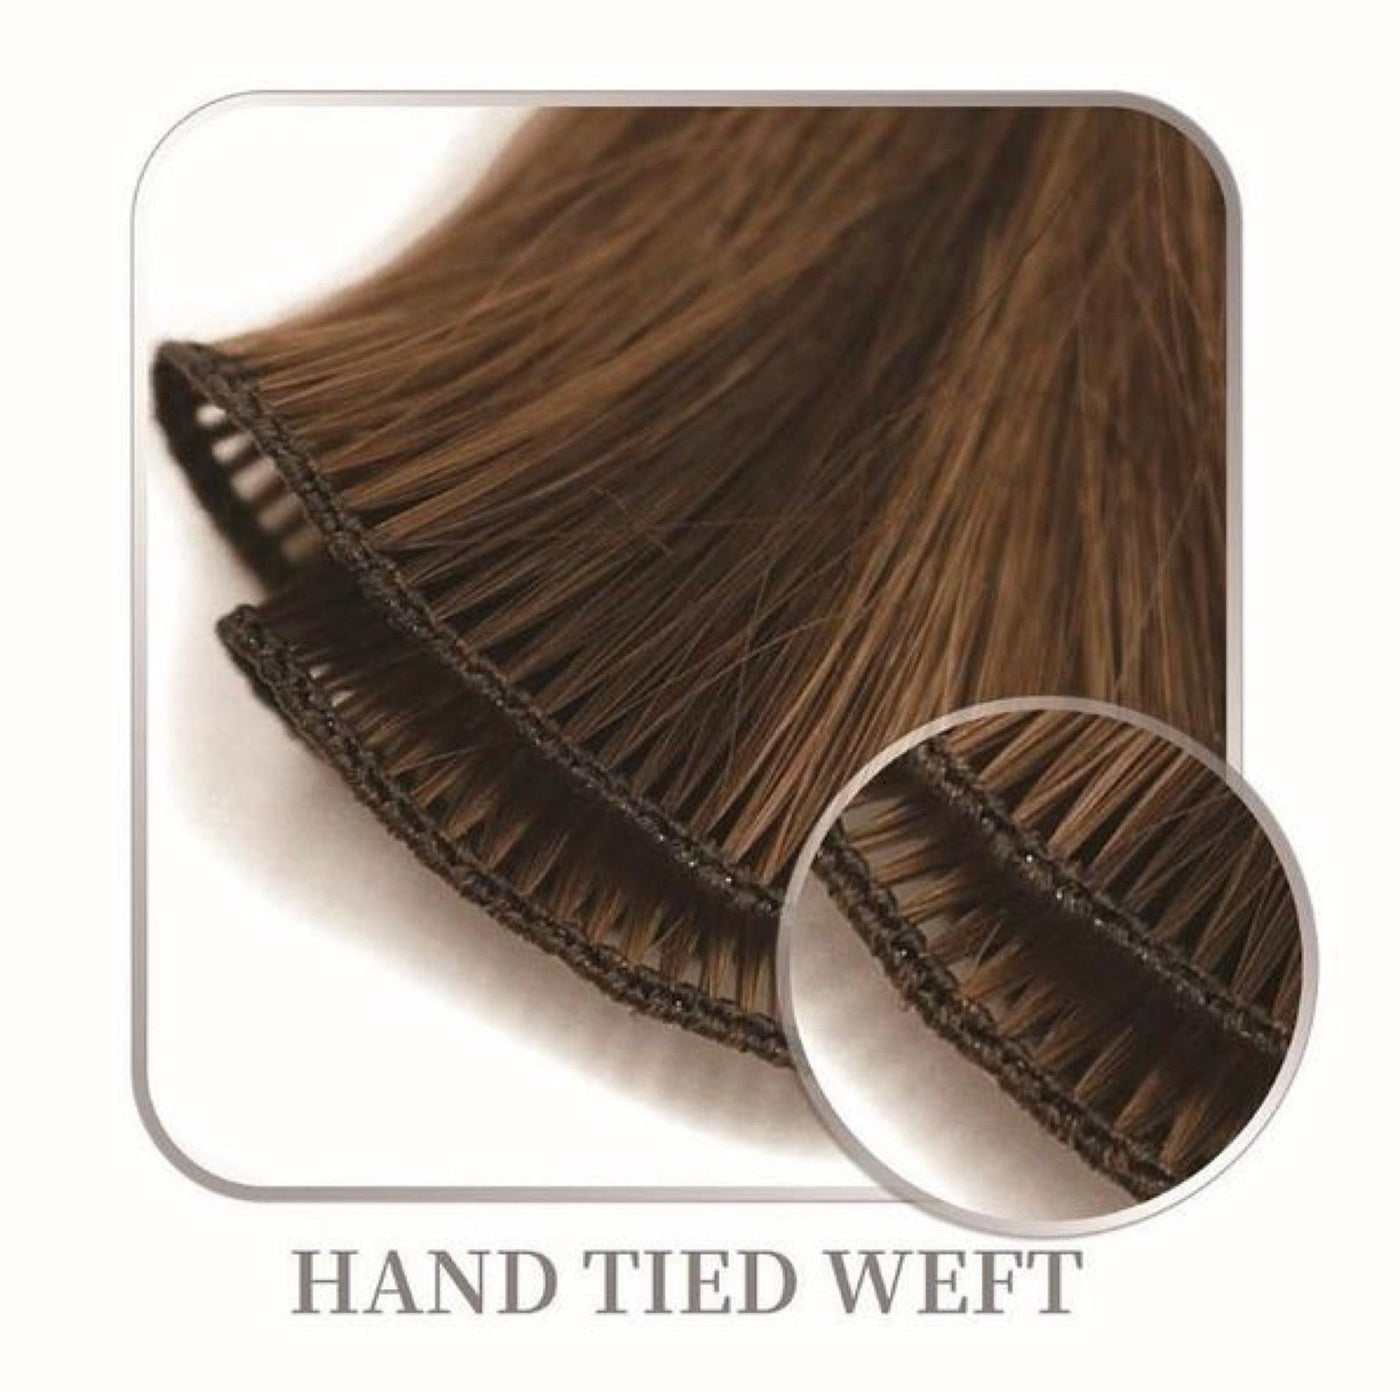 Hand tied wefts 22'' - Millionaire Beauty Brand Extensions 